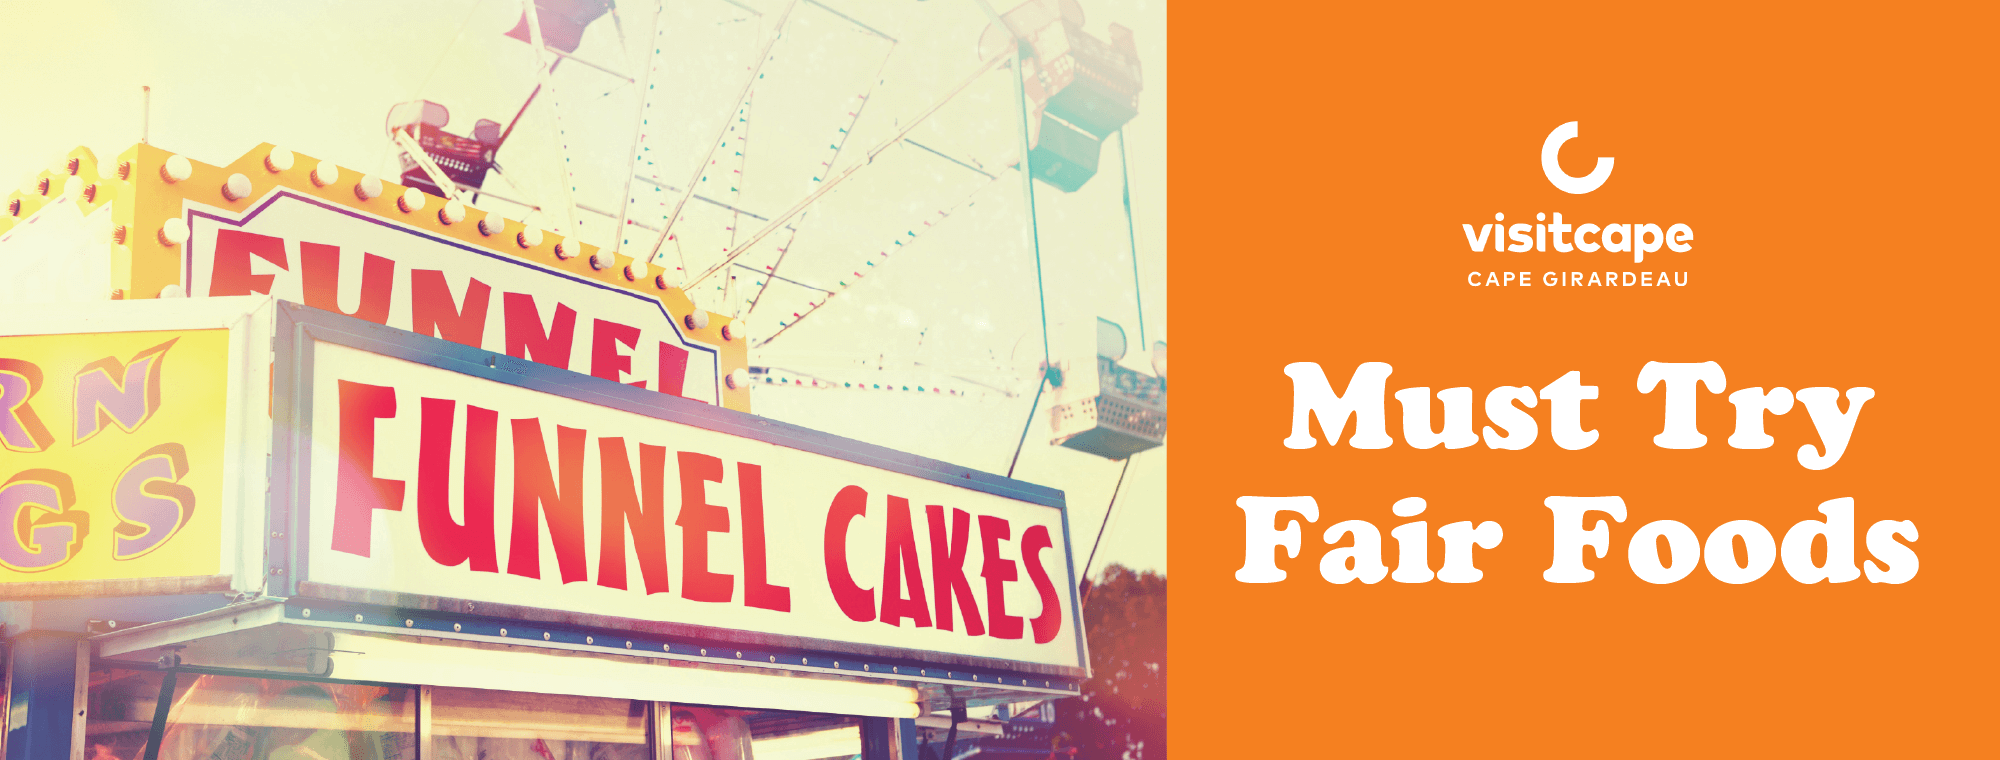 "Must Try Fair Foods" next to a funnel cake stand